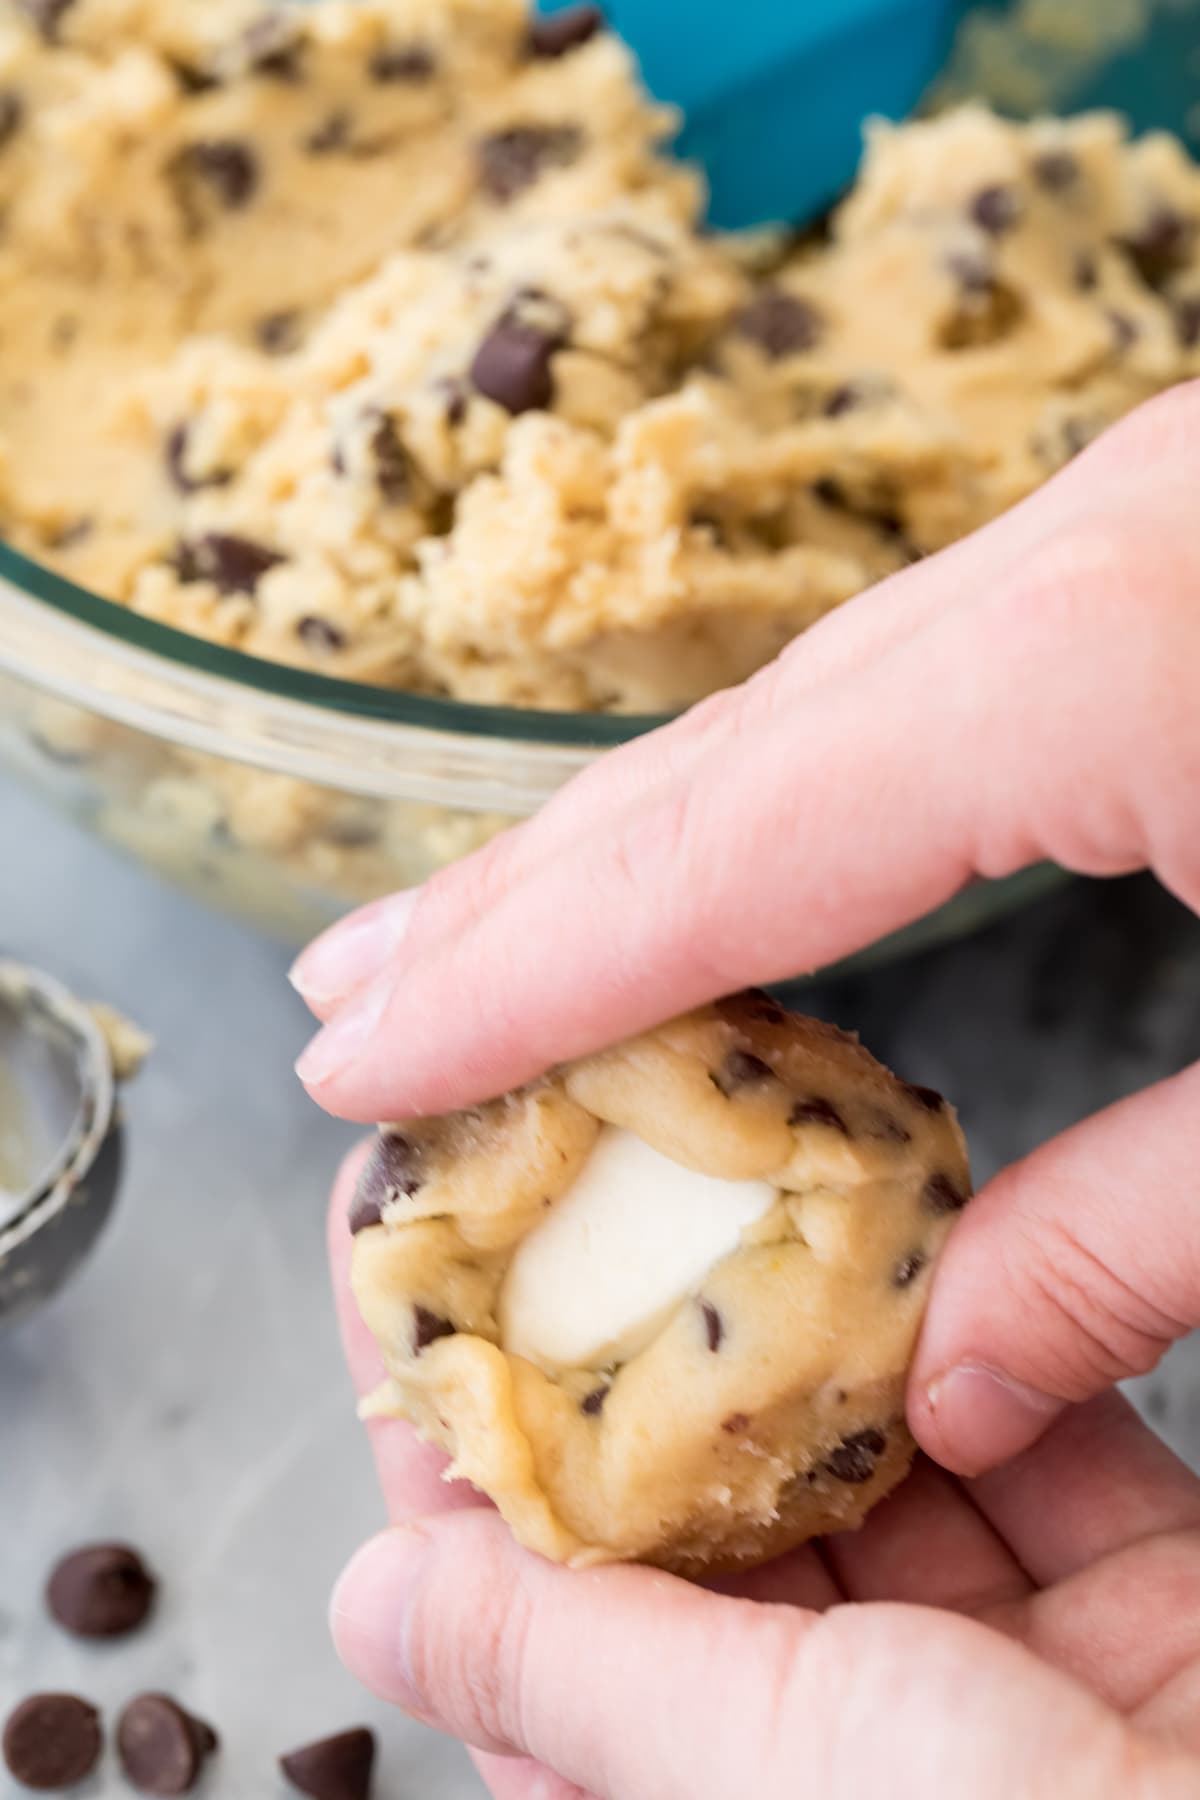 Stuffing cookie dough with frozen cheesecake